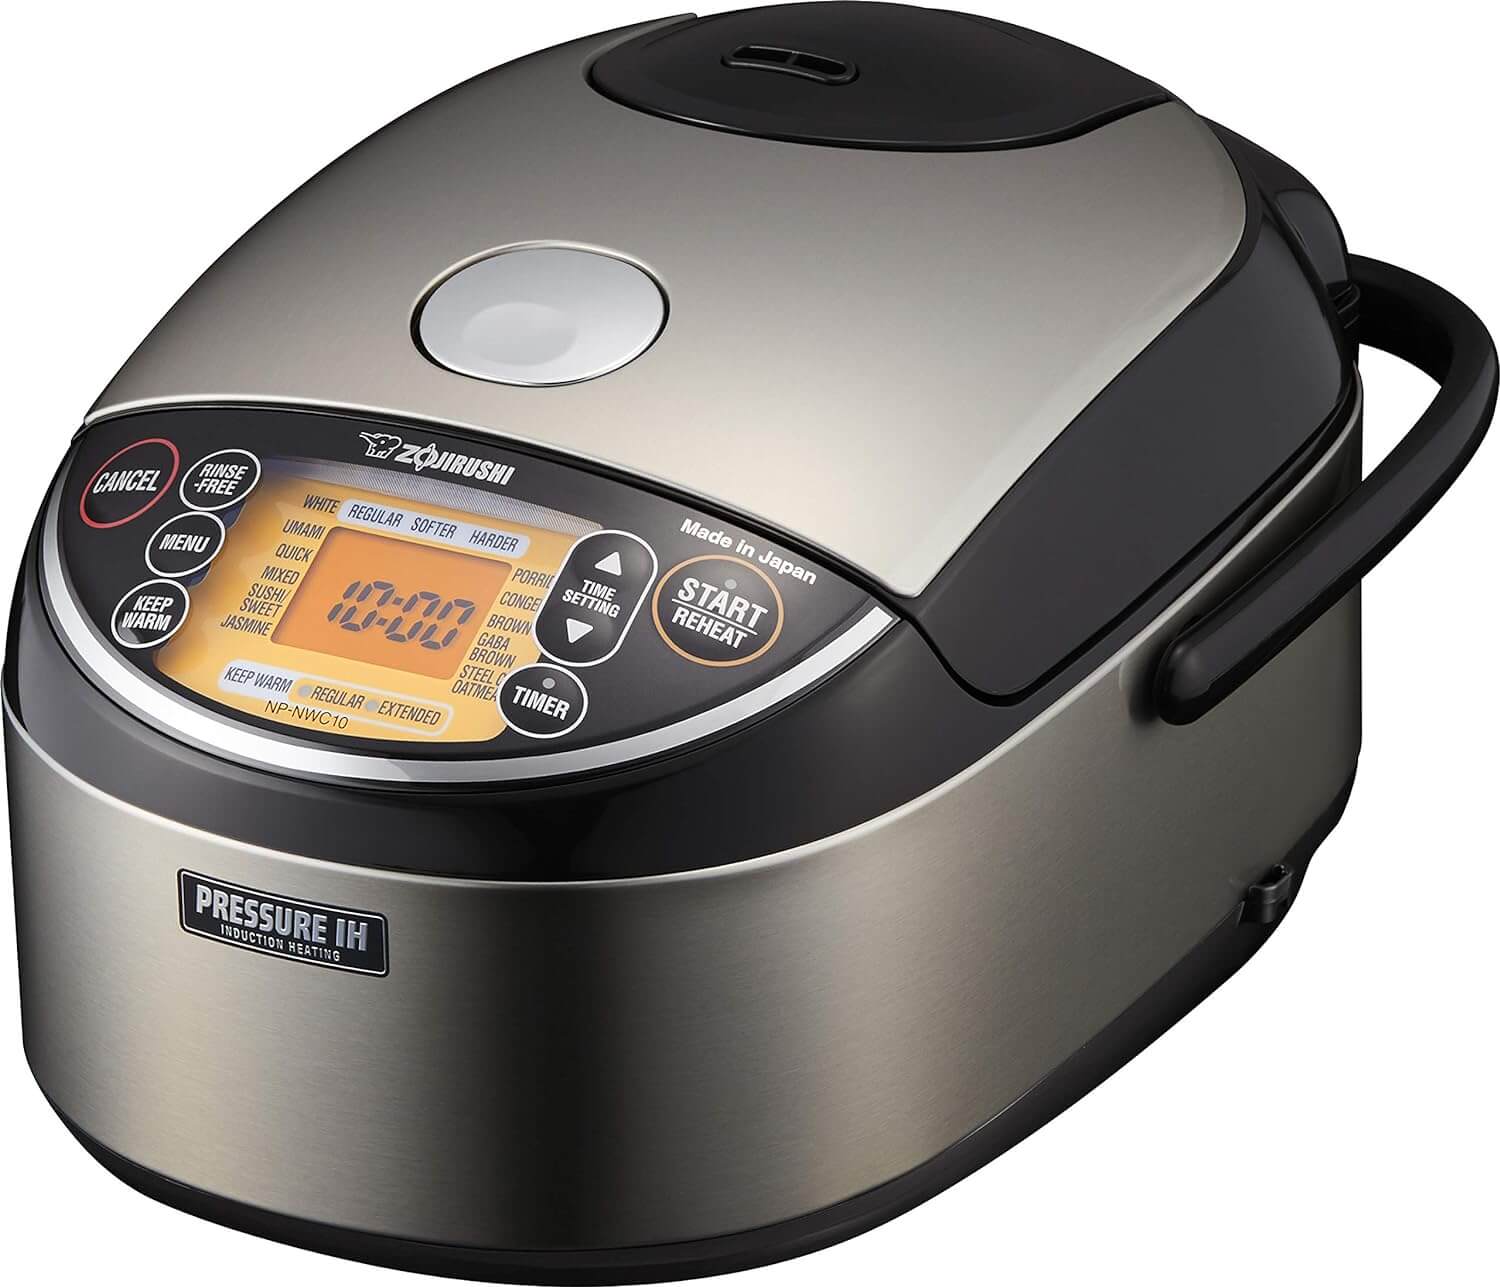 Zojirushi 5.5-cup Induction Rice Cooker